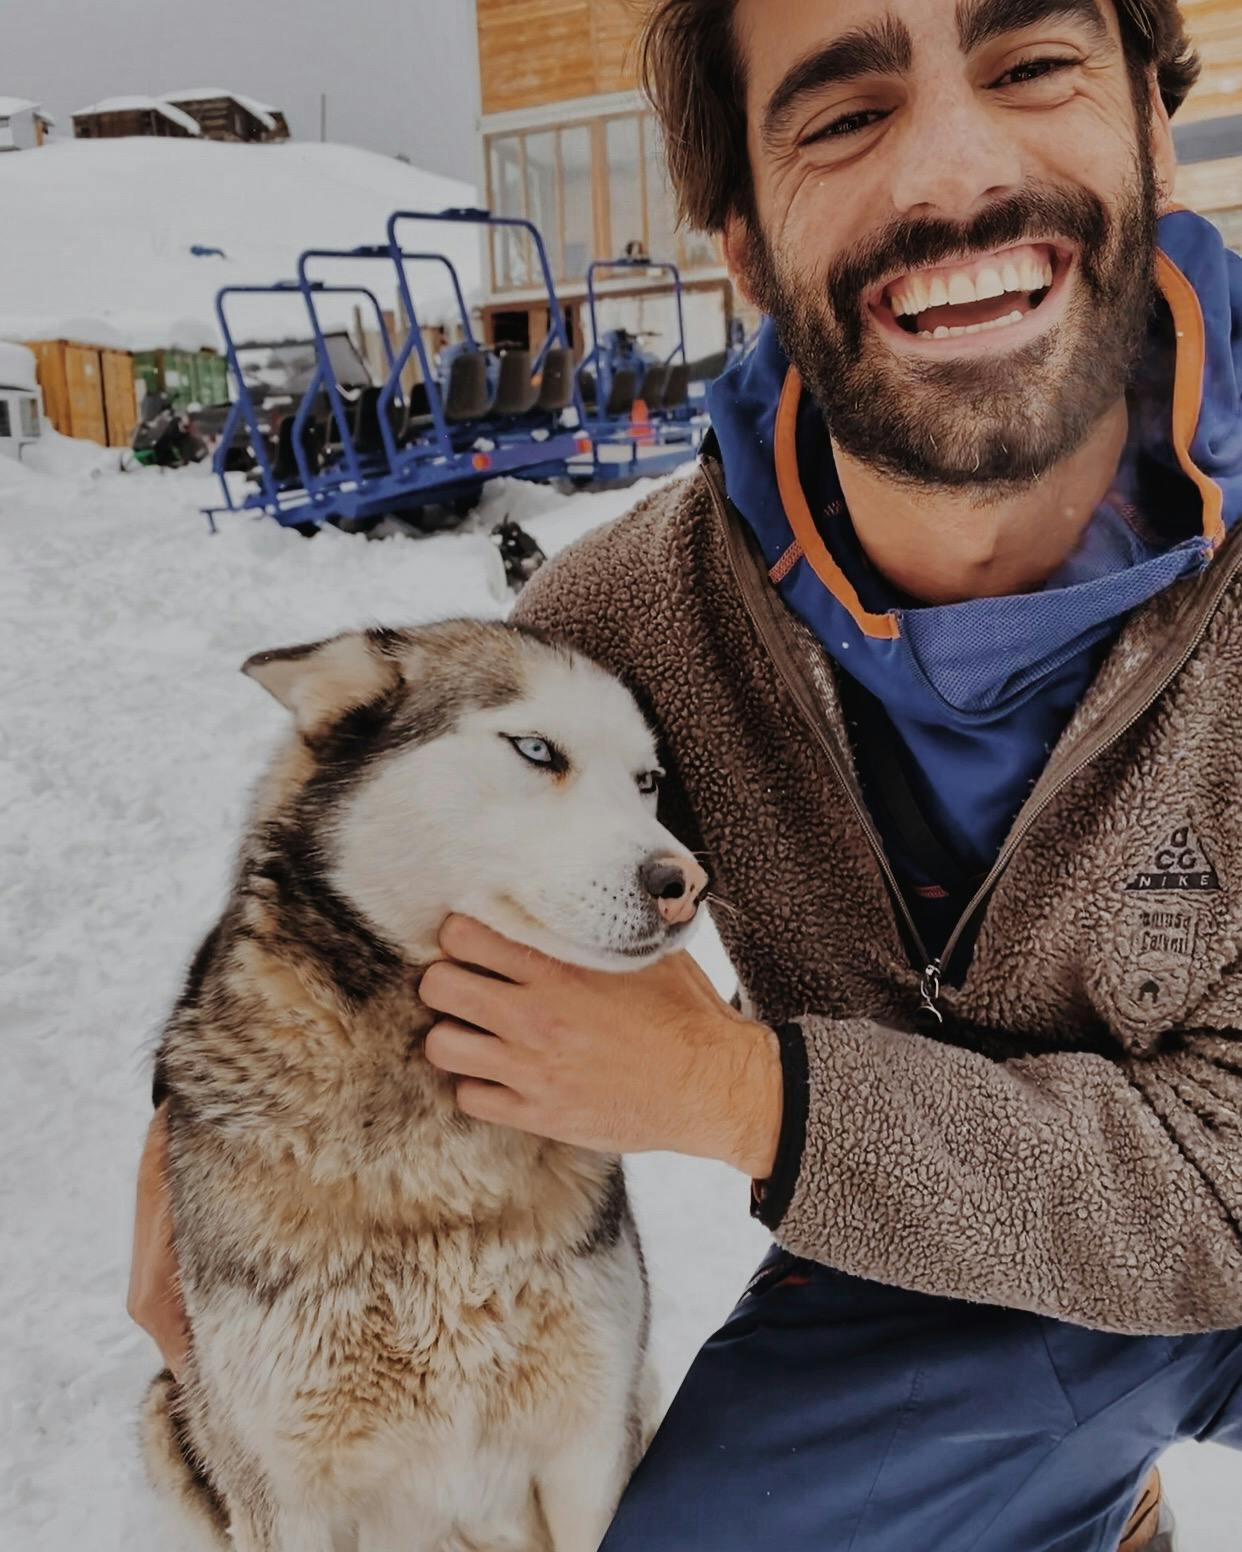 Man smiling and holding a dog 